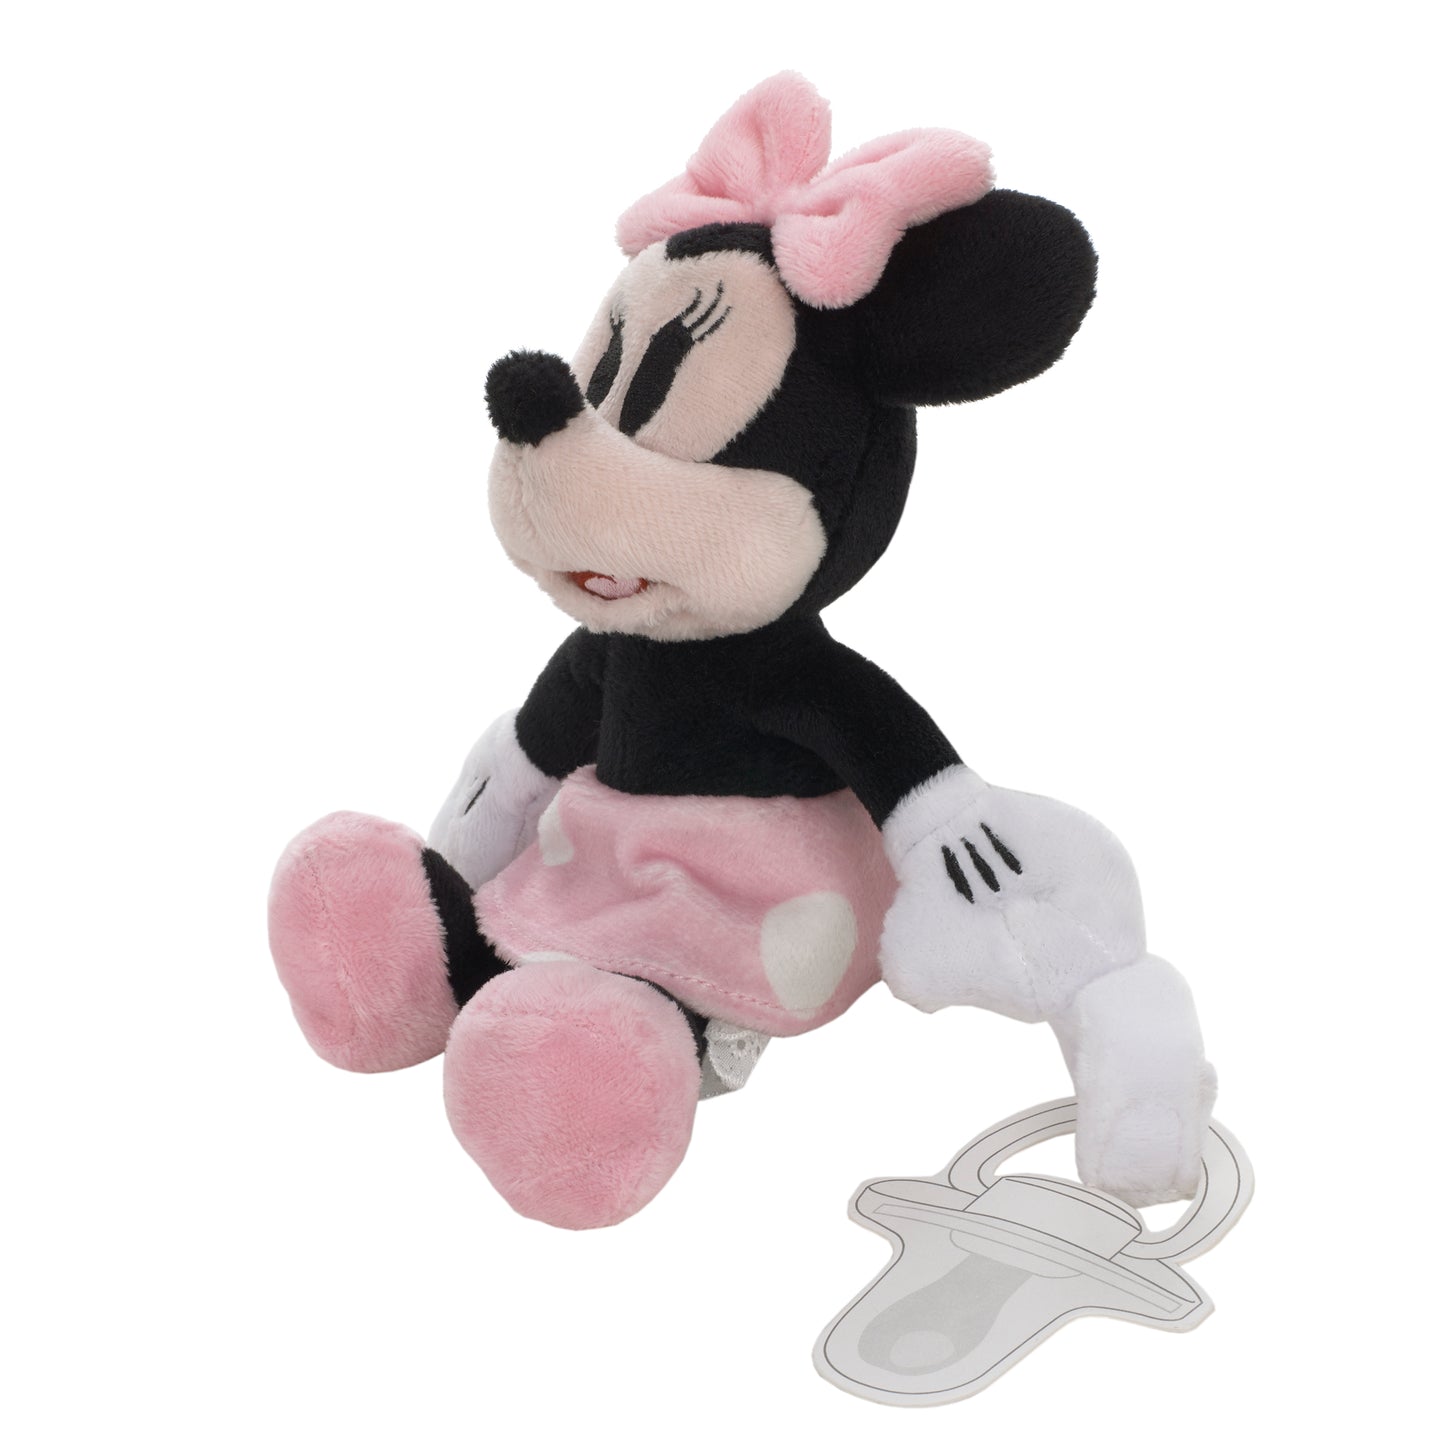 Disney Minnie Mouse White, Pink and Black with Polka Dot Skirt Plush Buddy Pacifier Holder